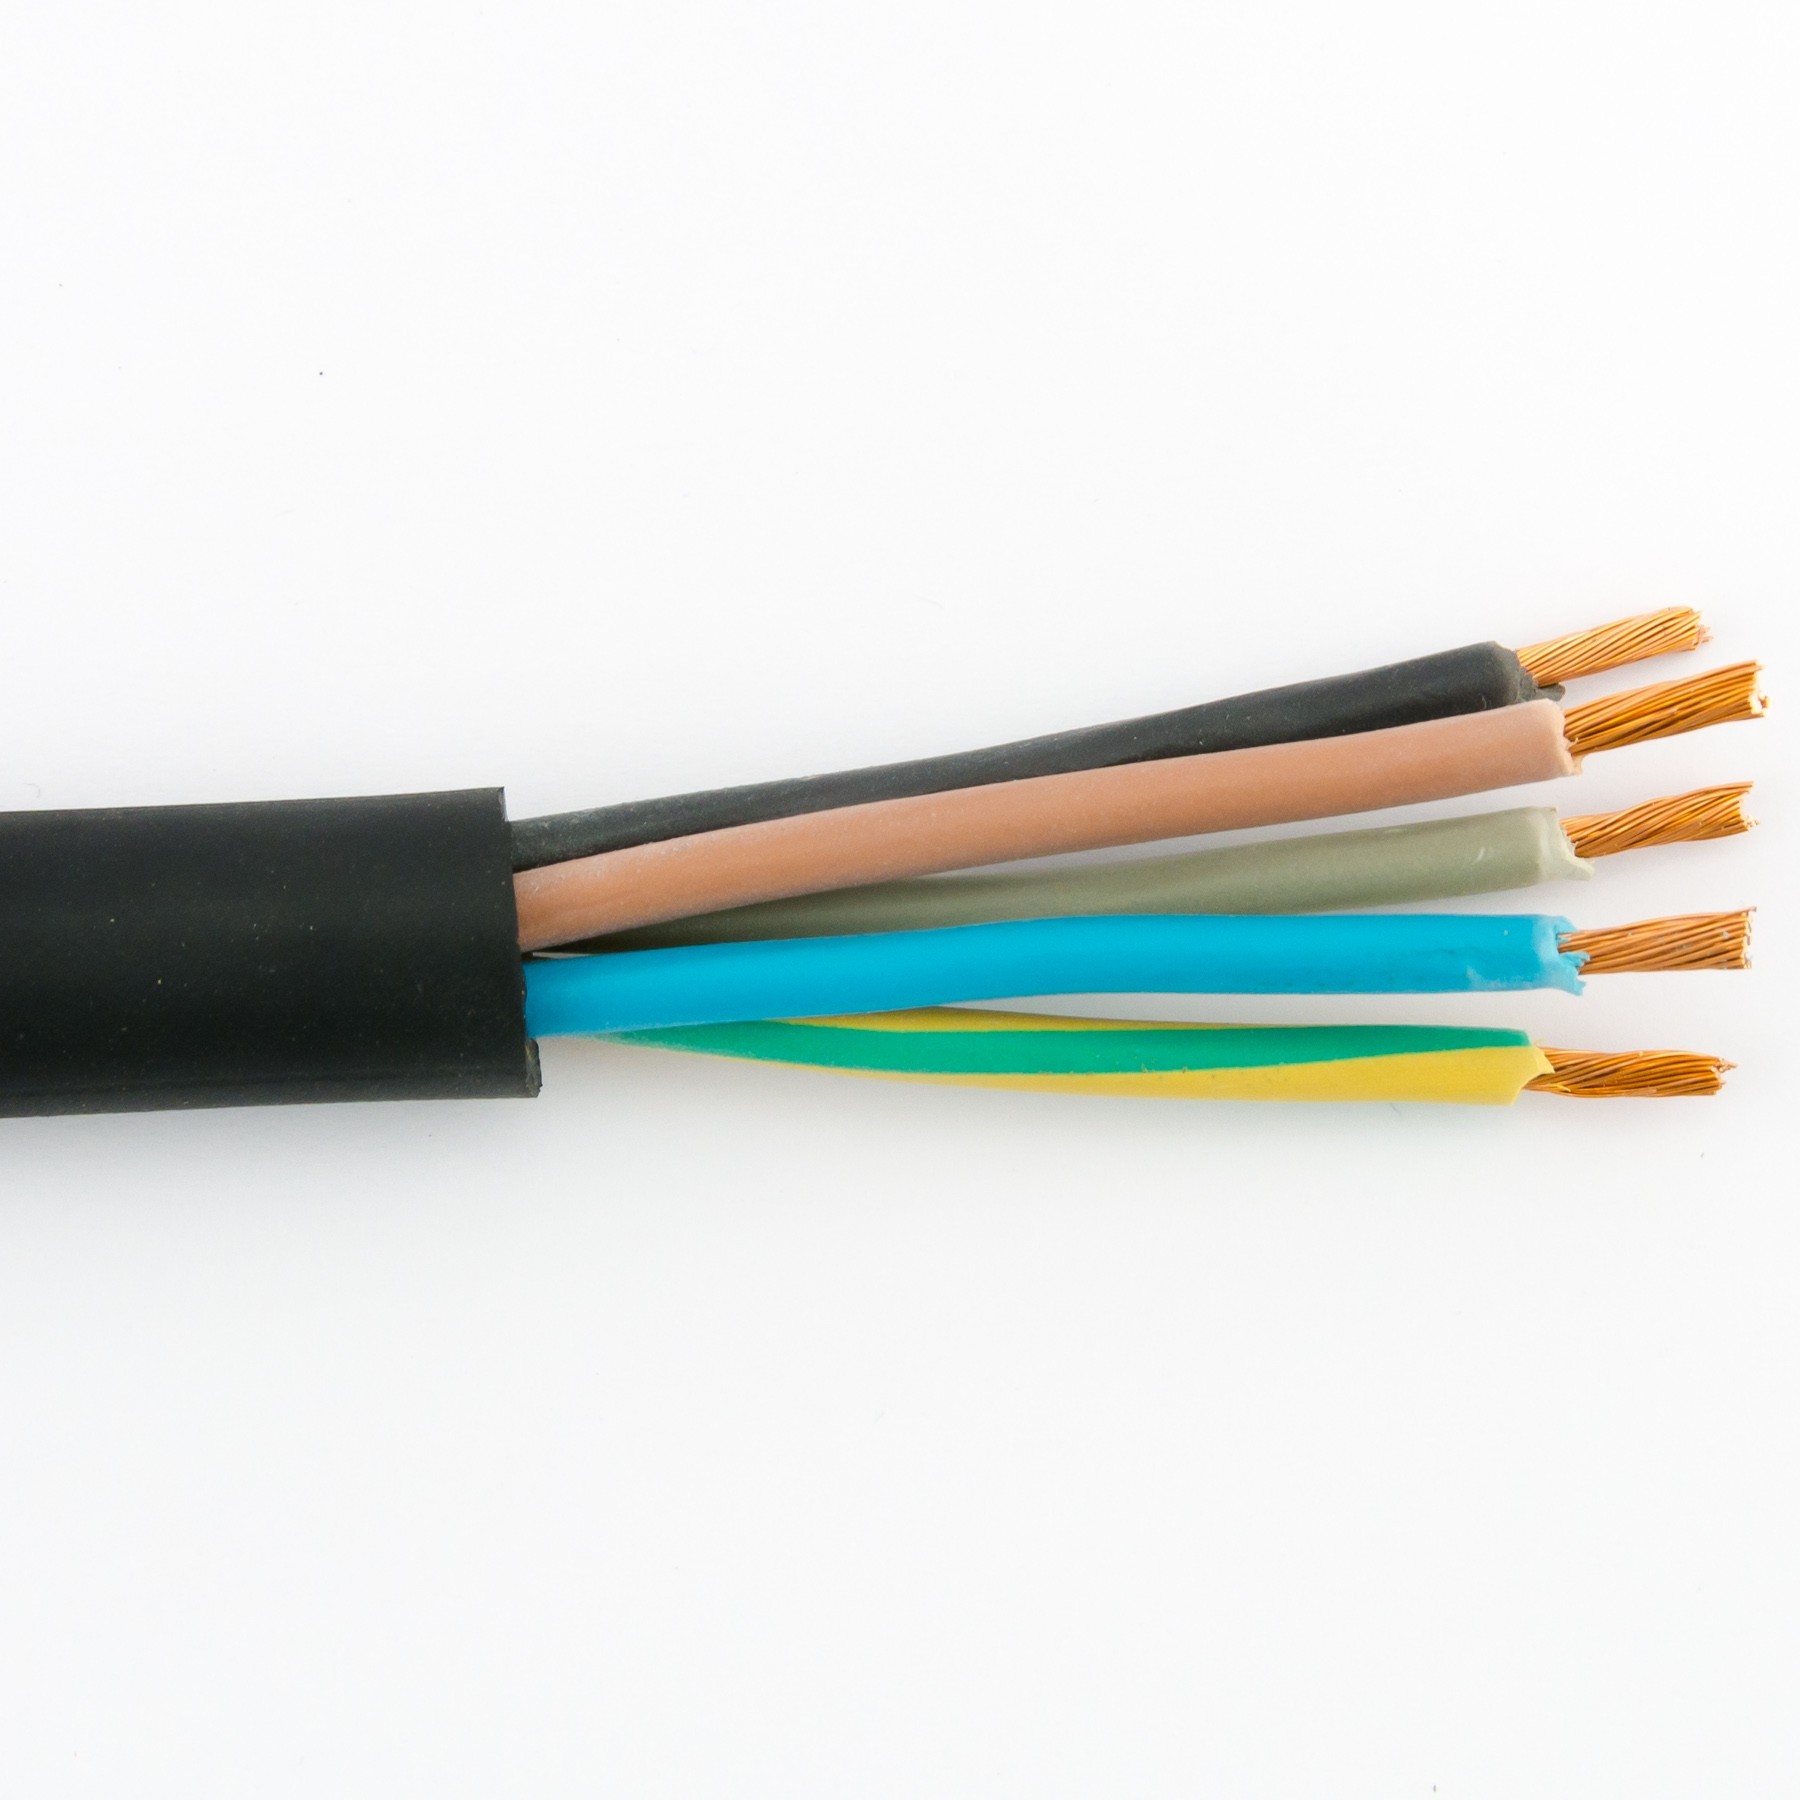 5x2.5mm² neoprene cable for heating element